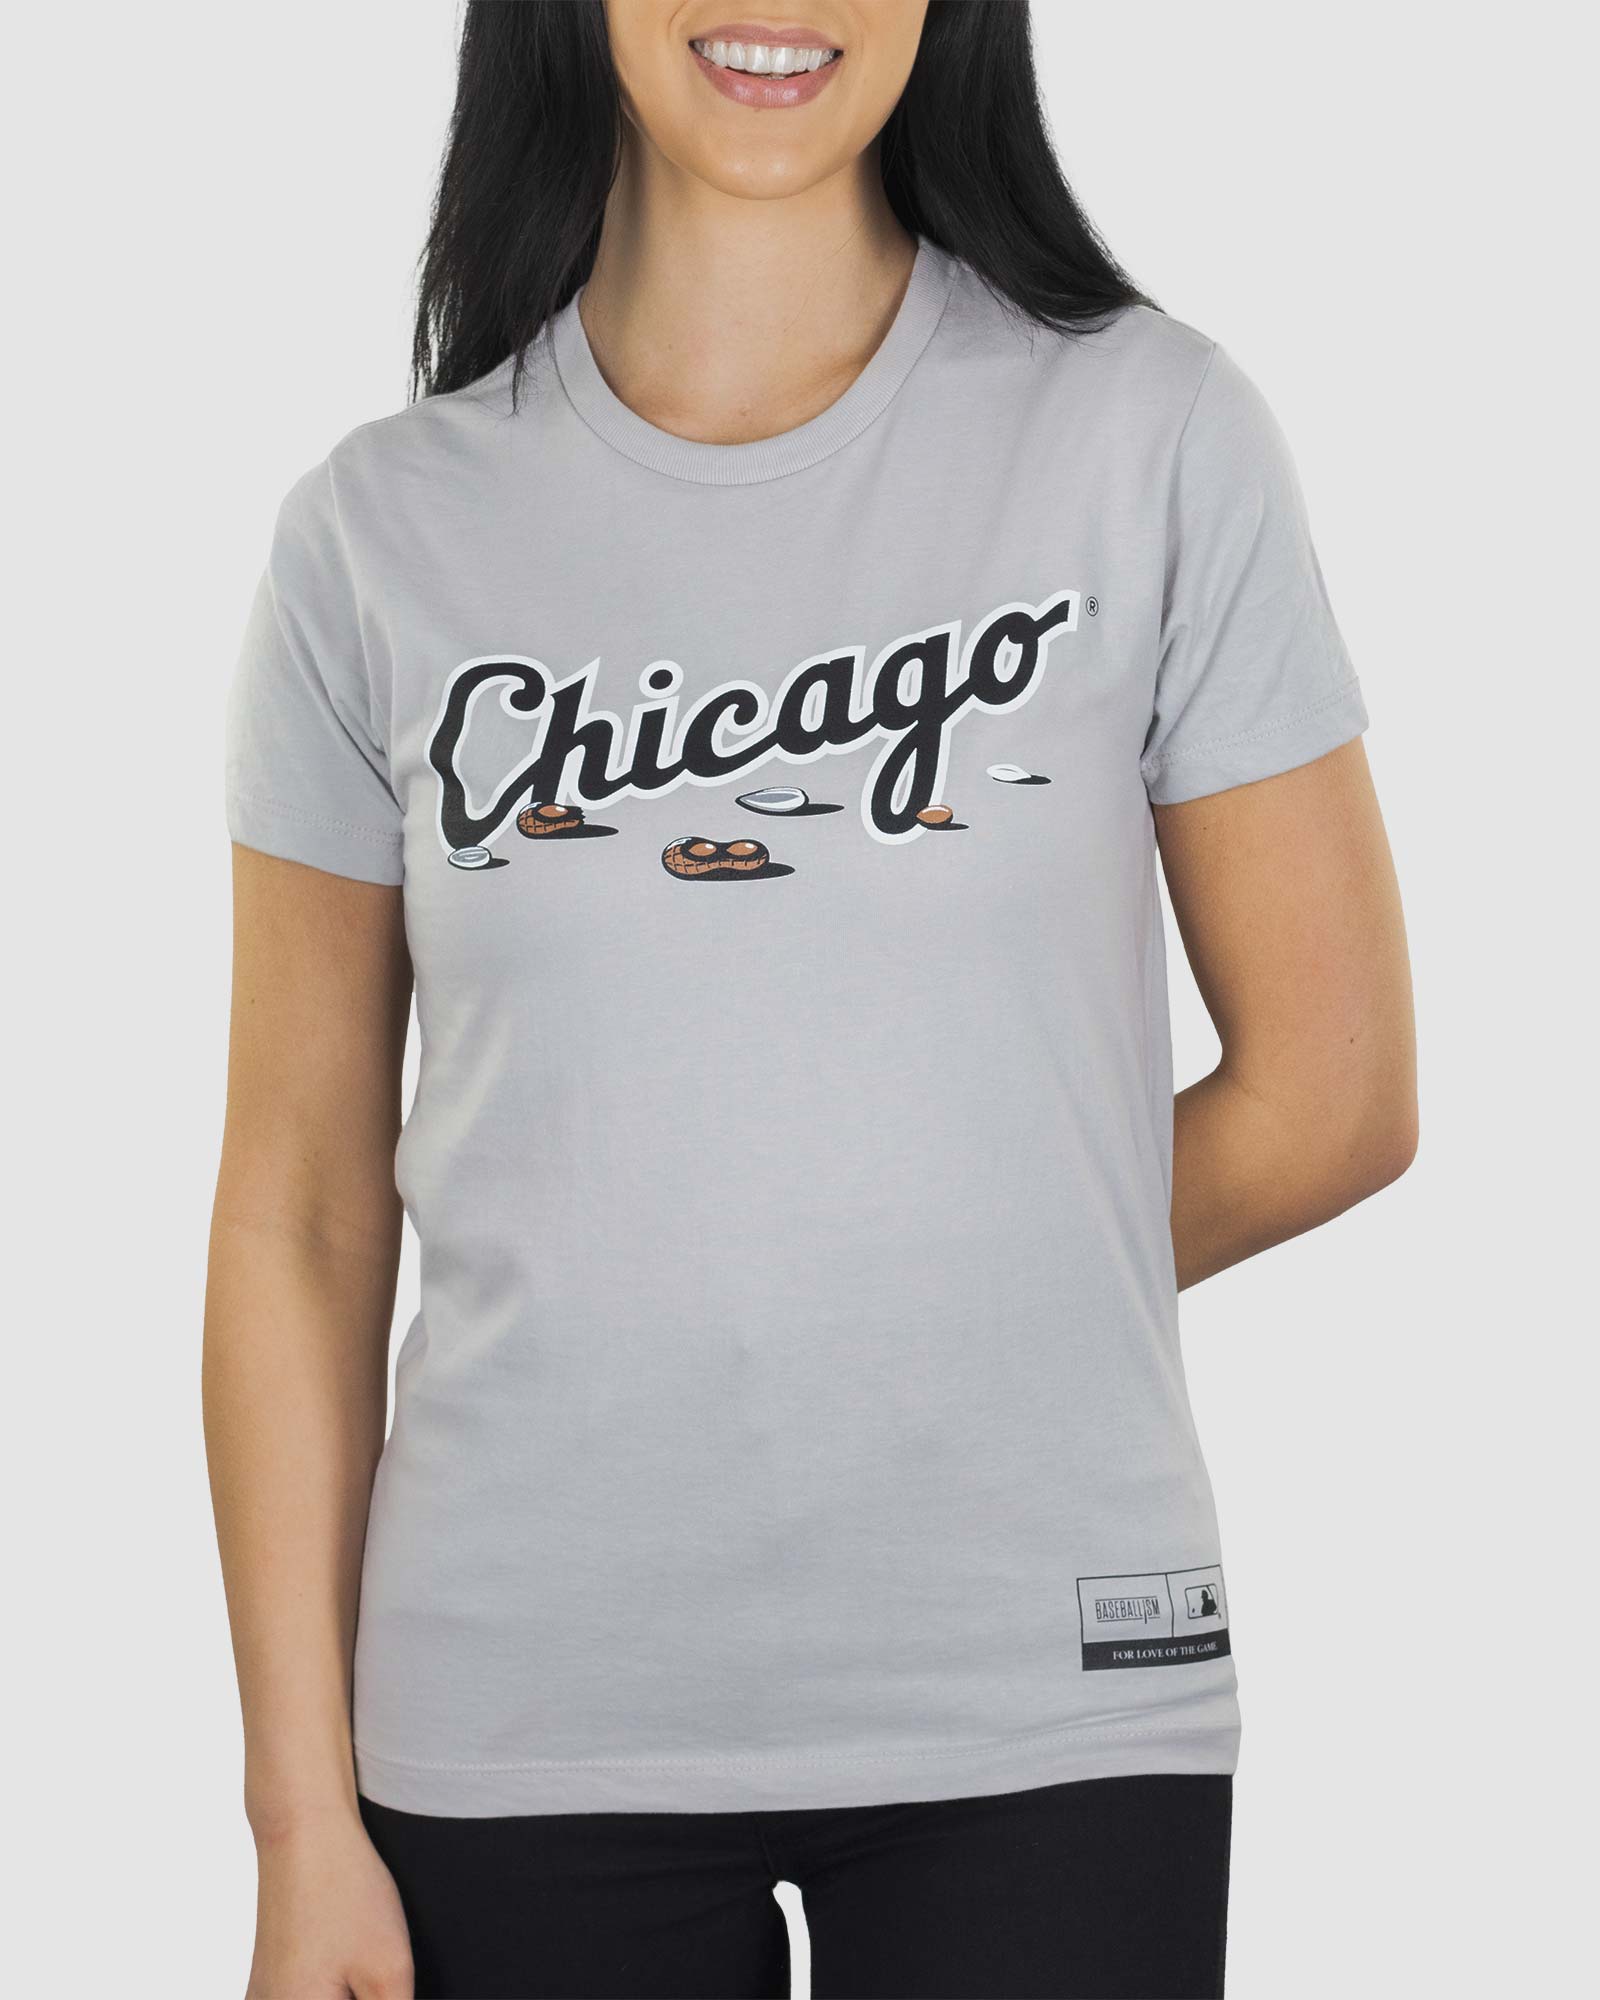 Women's Chicago White Sox Gear, Womens White Sox Apparel, Ladies White Sox  Outfits